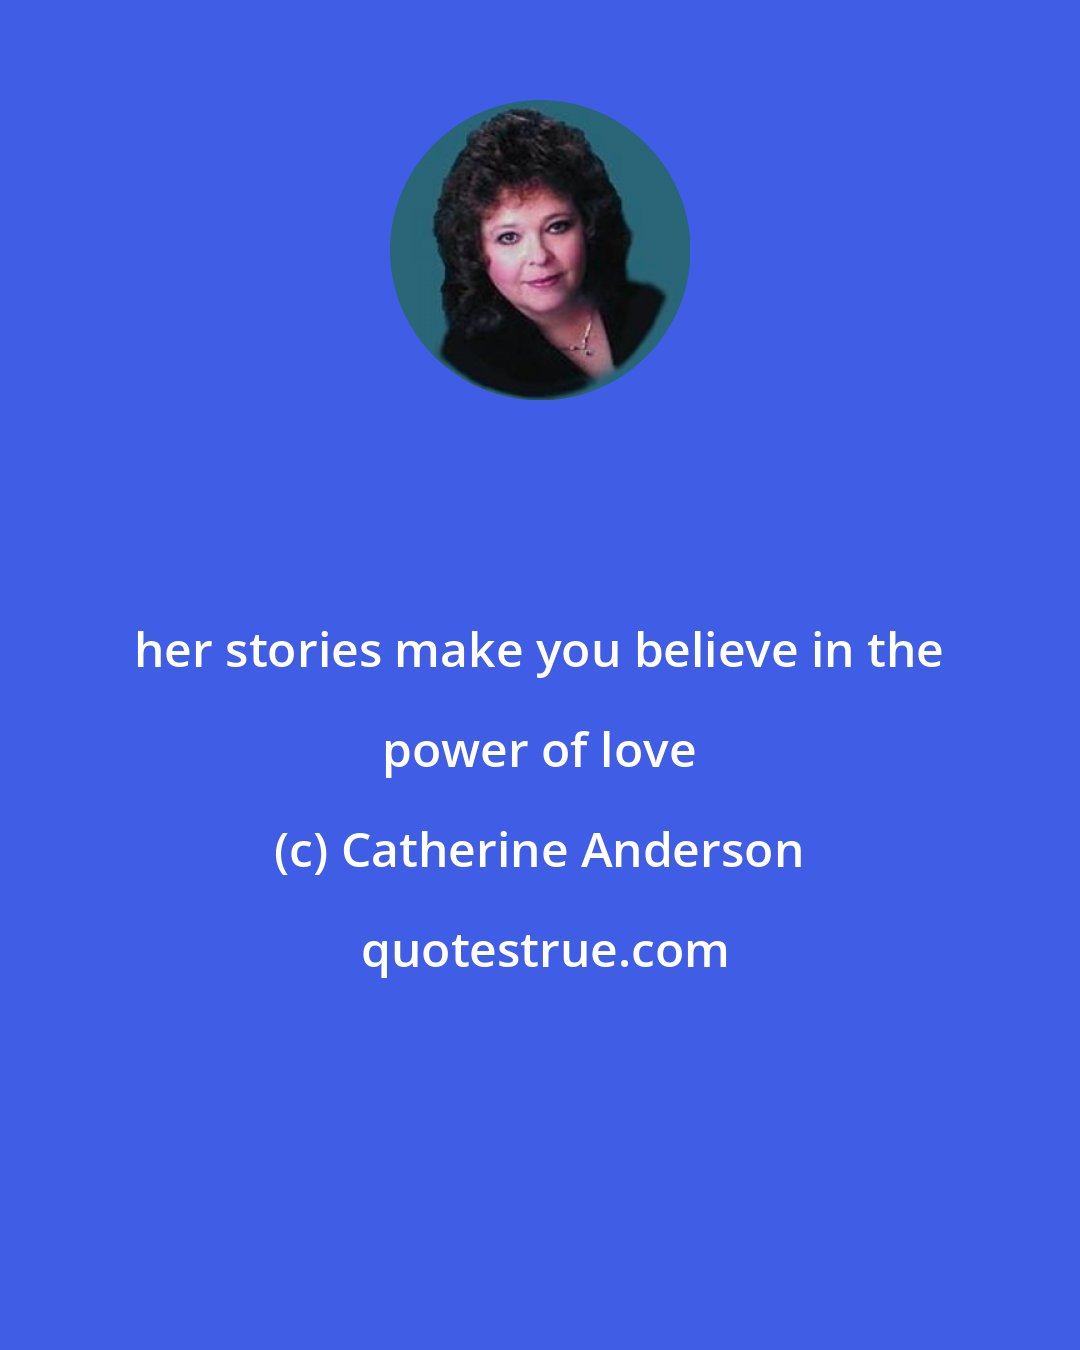 Catherine Anderson: her stories make you believe in the power of love